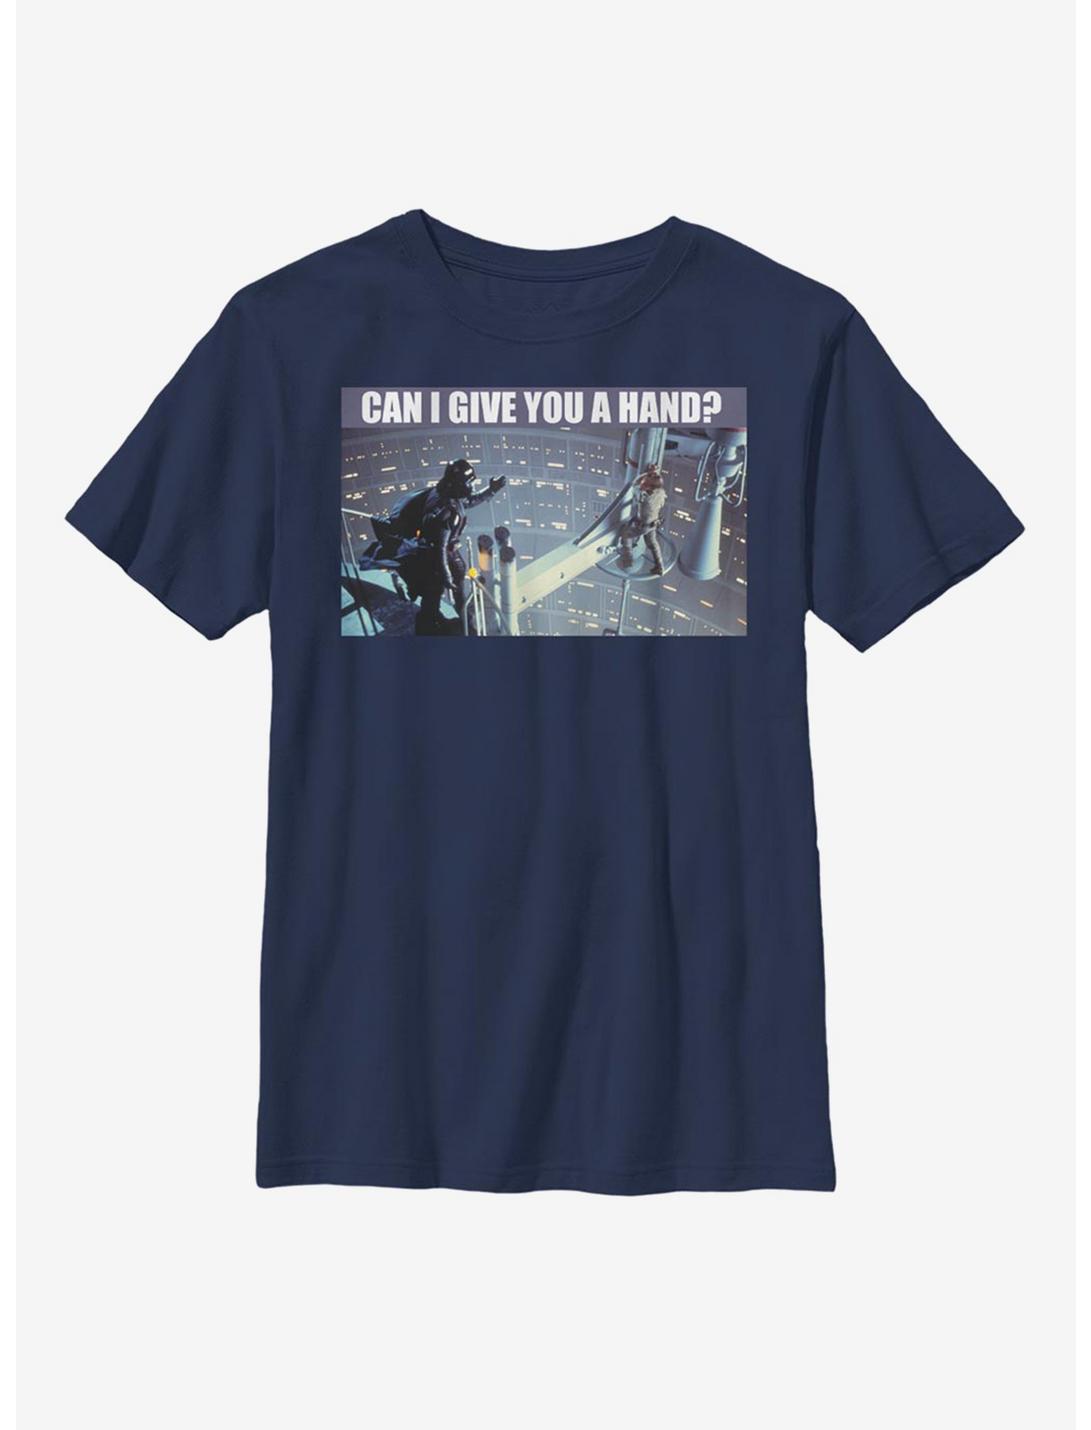 Plus Size Star Wars Vader Luke Can I Give You A Hand Youth T-Shirt, NAVY, hi-res